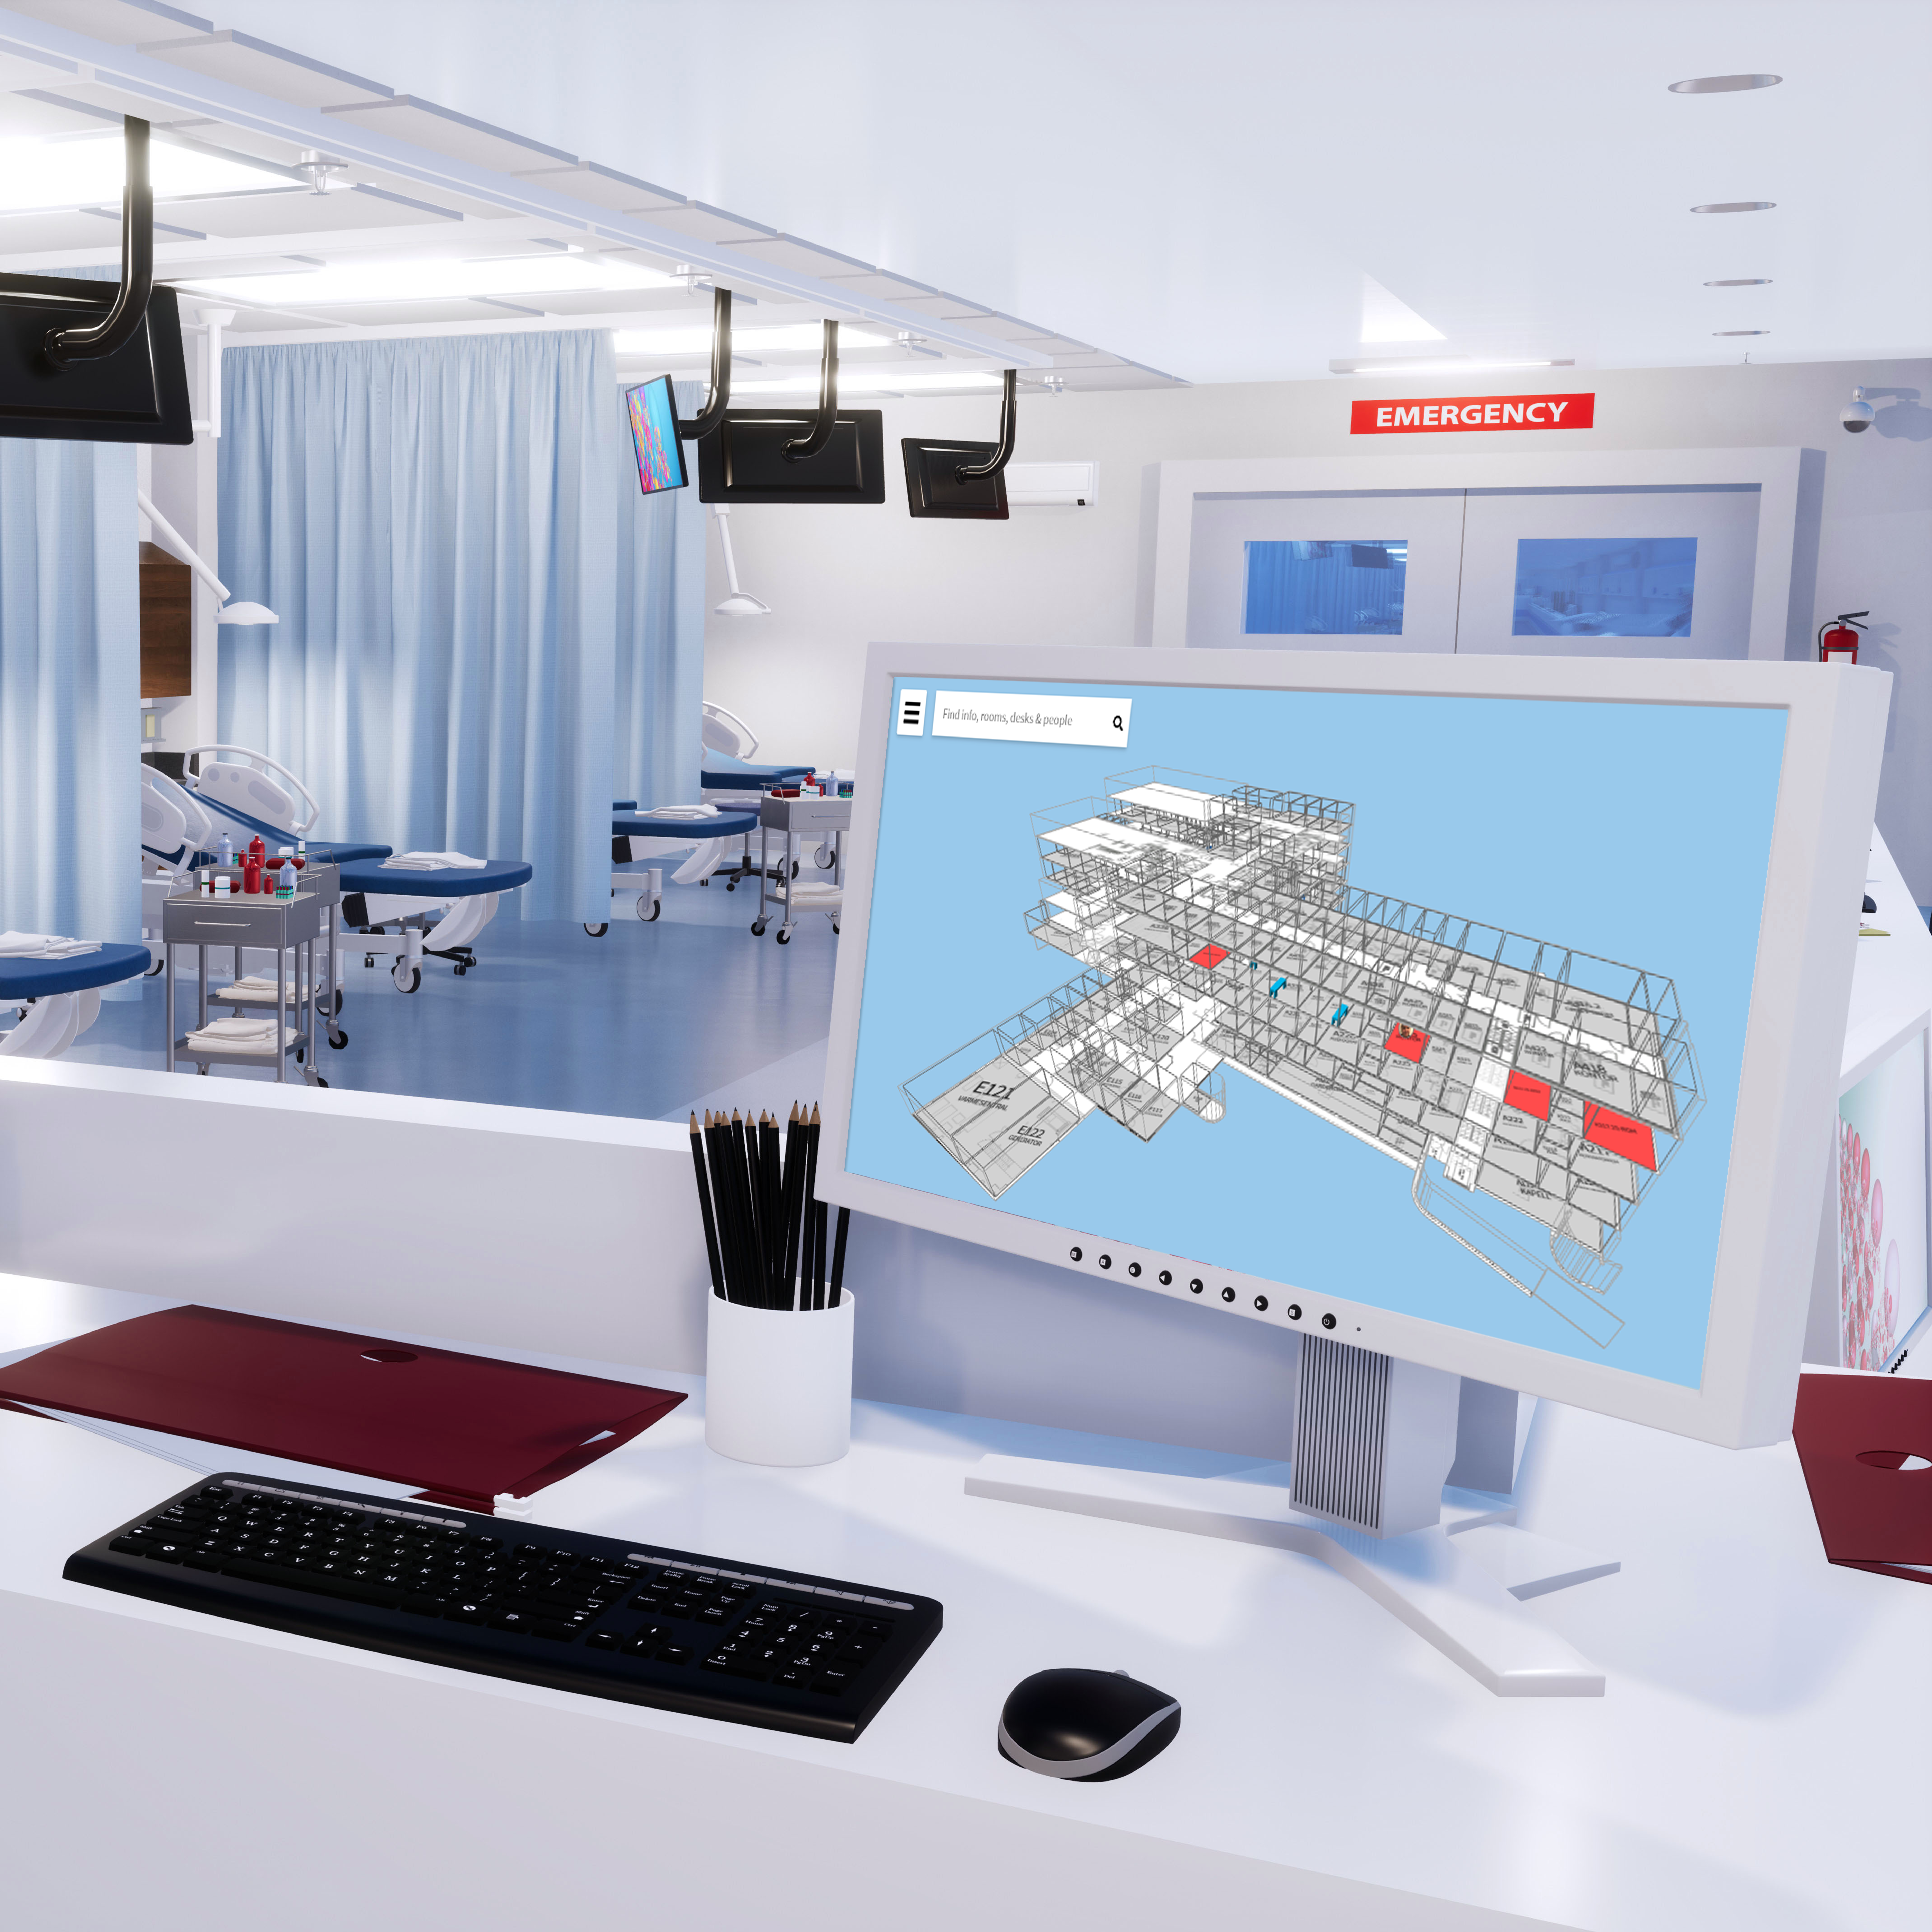 Empathic Building hospital solution on a screen